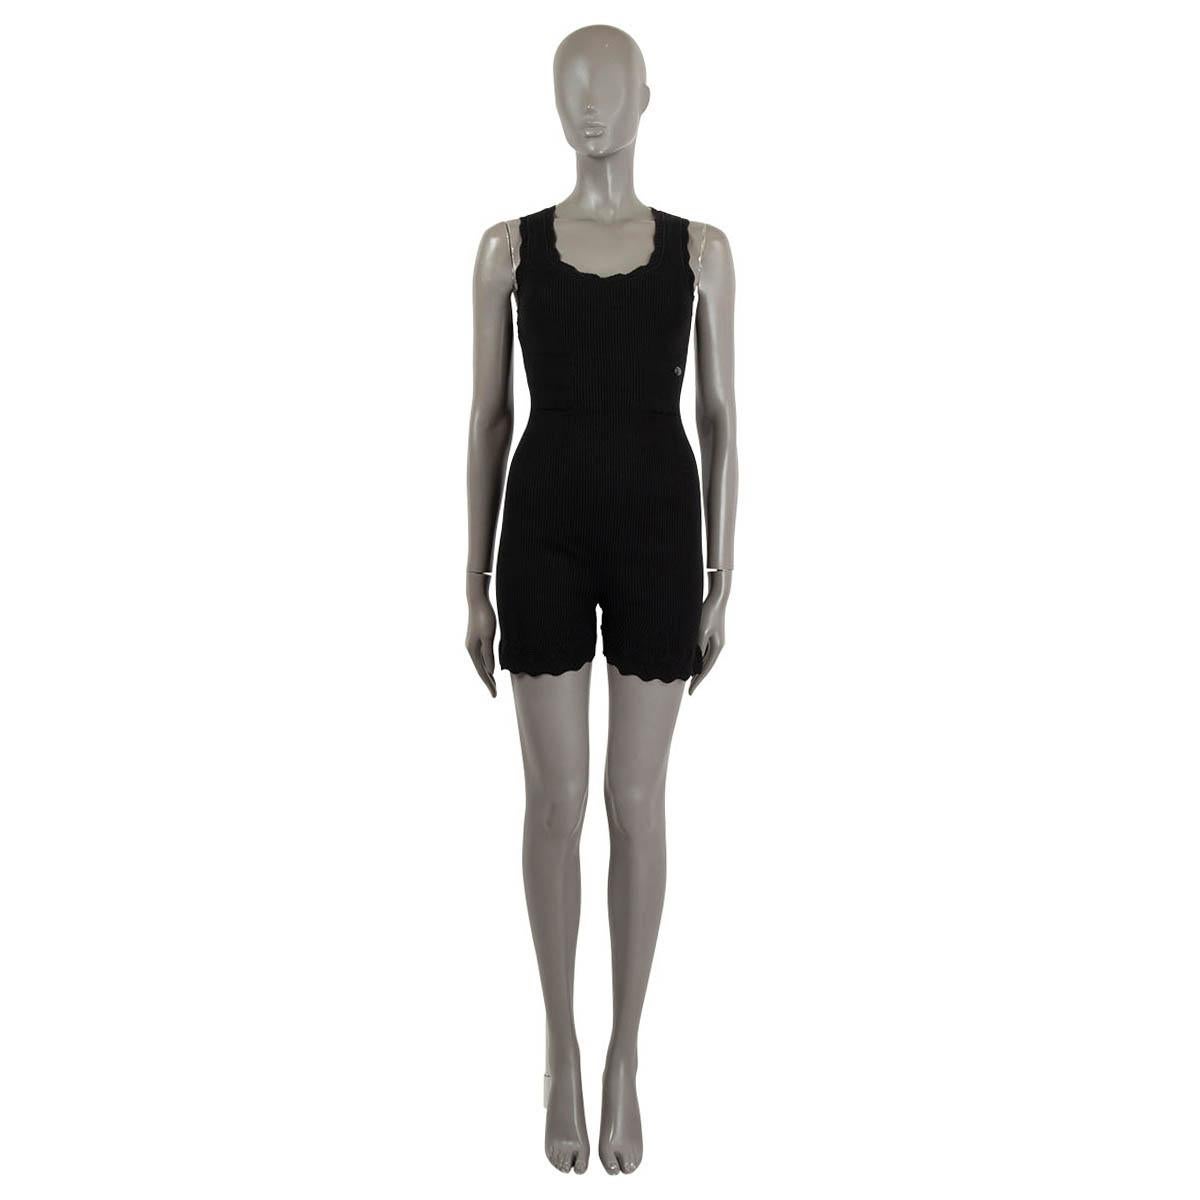 100% authentic Chanel sleeveless rib-knit bodycon mini jumpsuit in black cotton (100%) featuring two chest patch pockets. Opens with a zipper in the back. Unlined. Has been worn and is in excellent condition.

2018